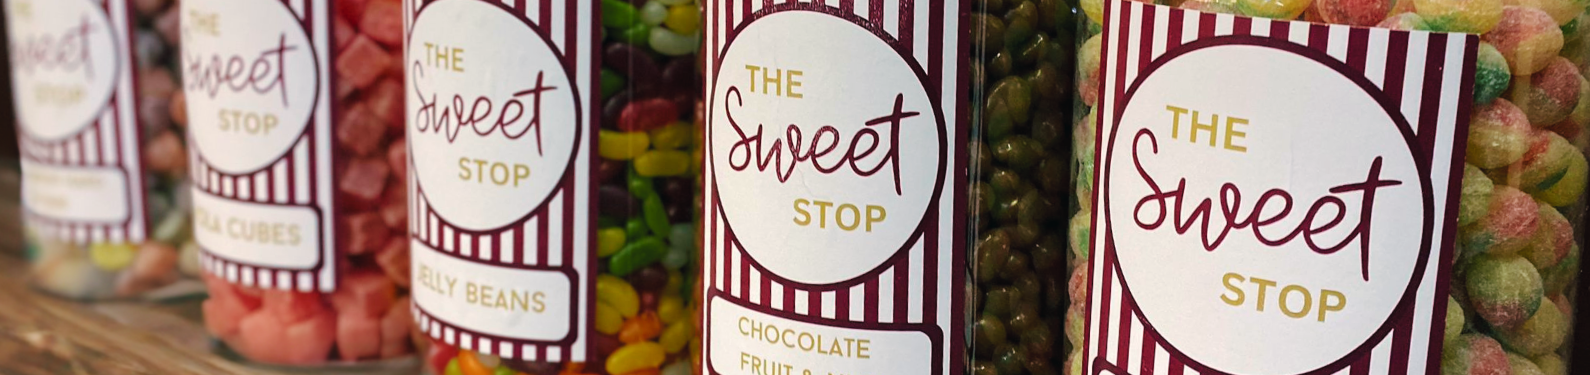 New Sweet Shop at The Station promises to be a real treat